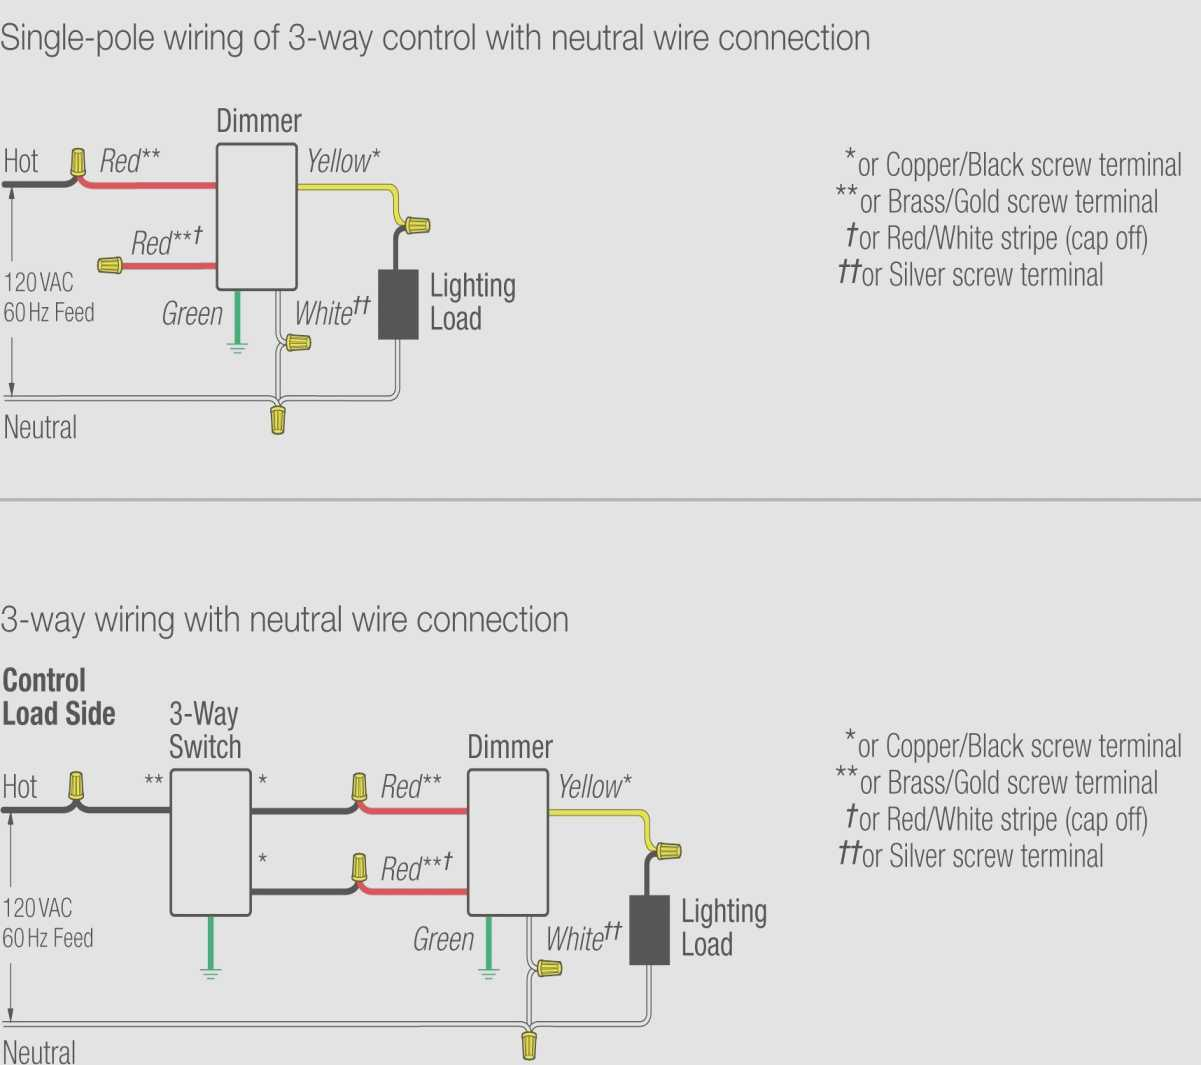 Lutron 3 Way Switch Wiring Diagram Lutron Dimmer 3 Way Switch Wiring Diagram Wiring Library